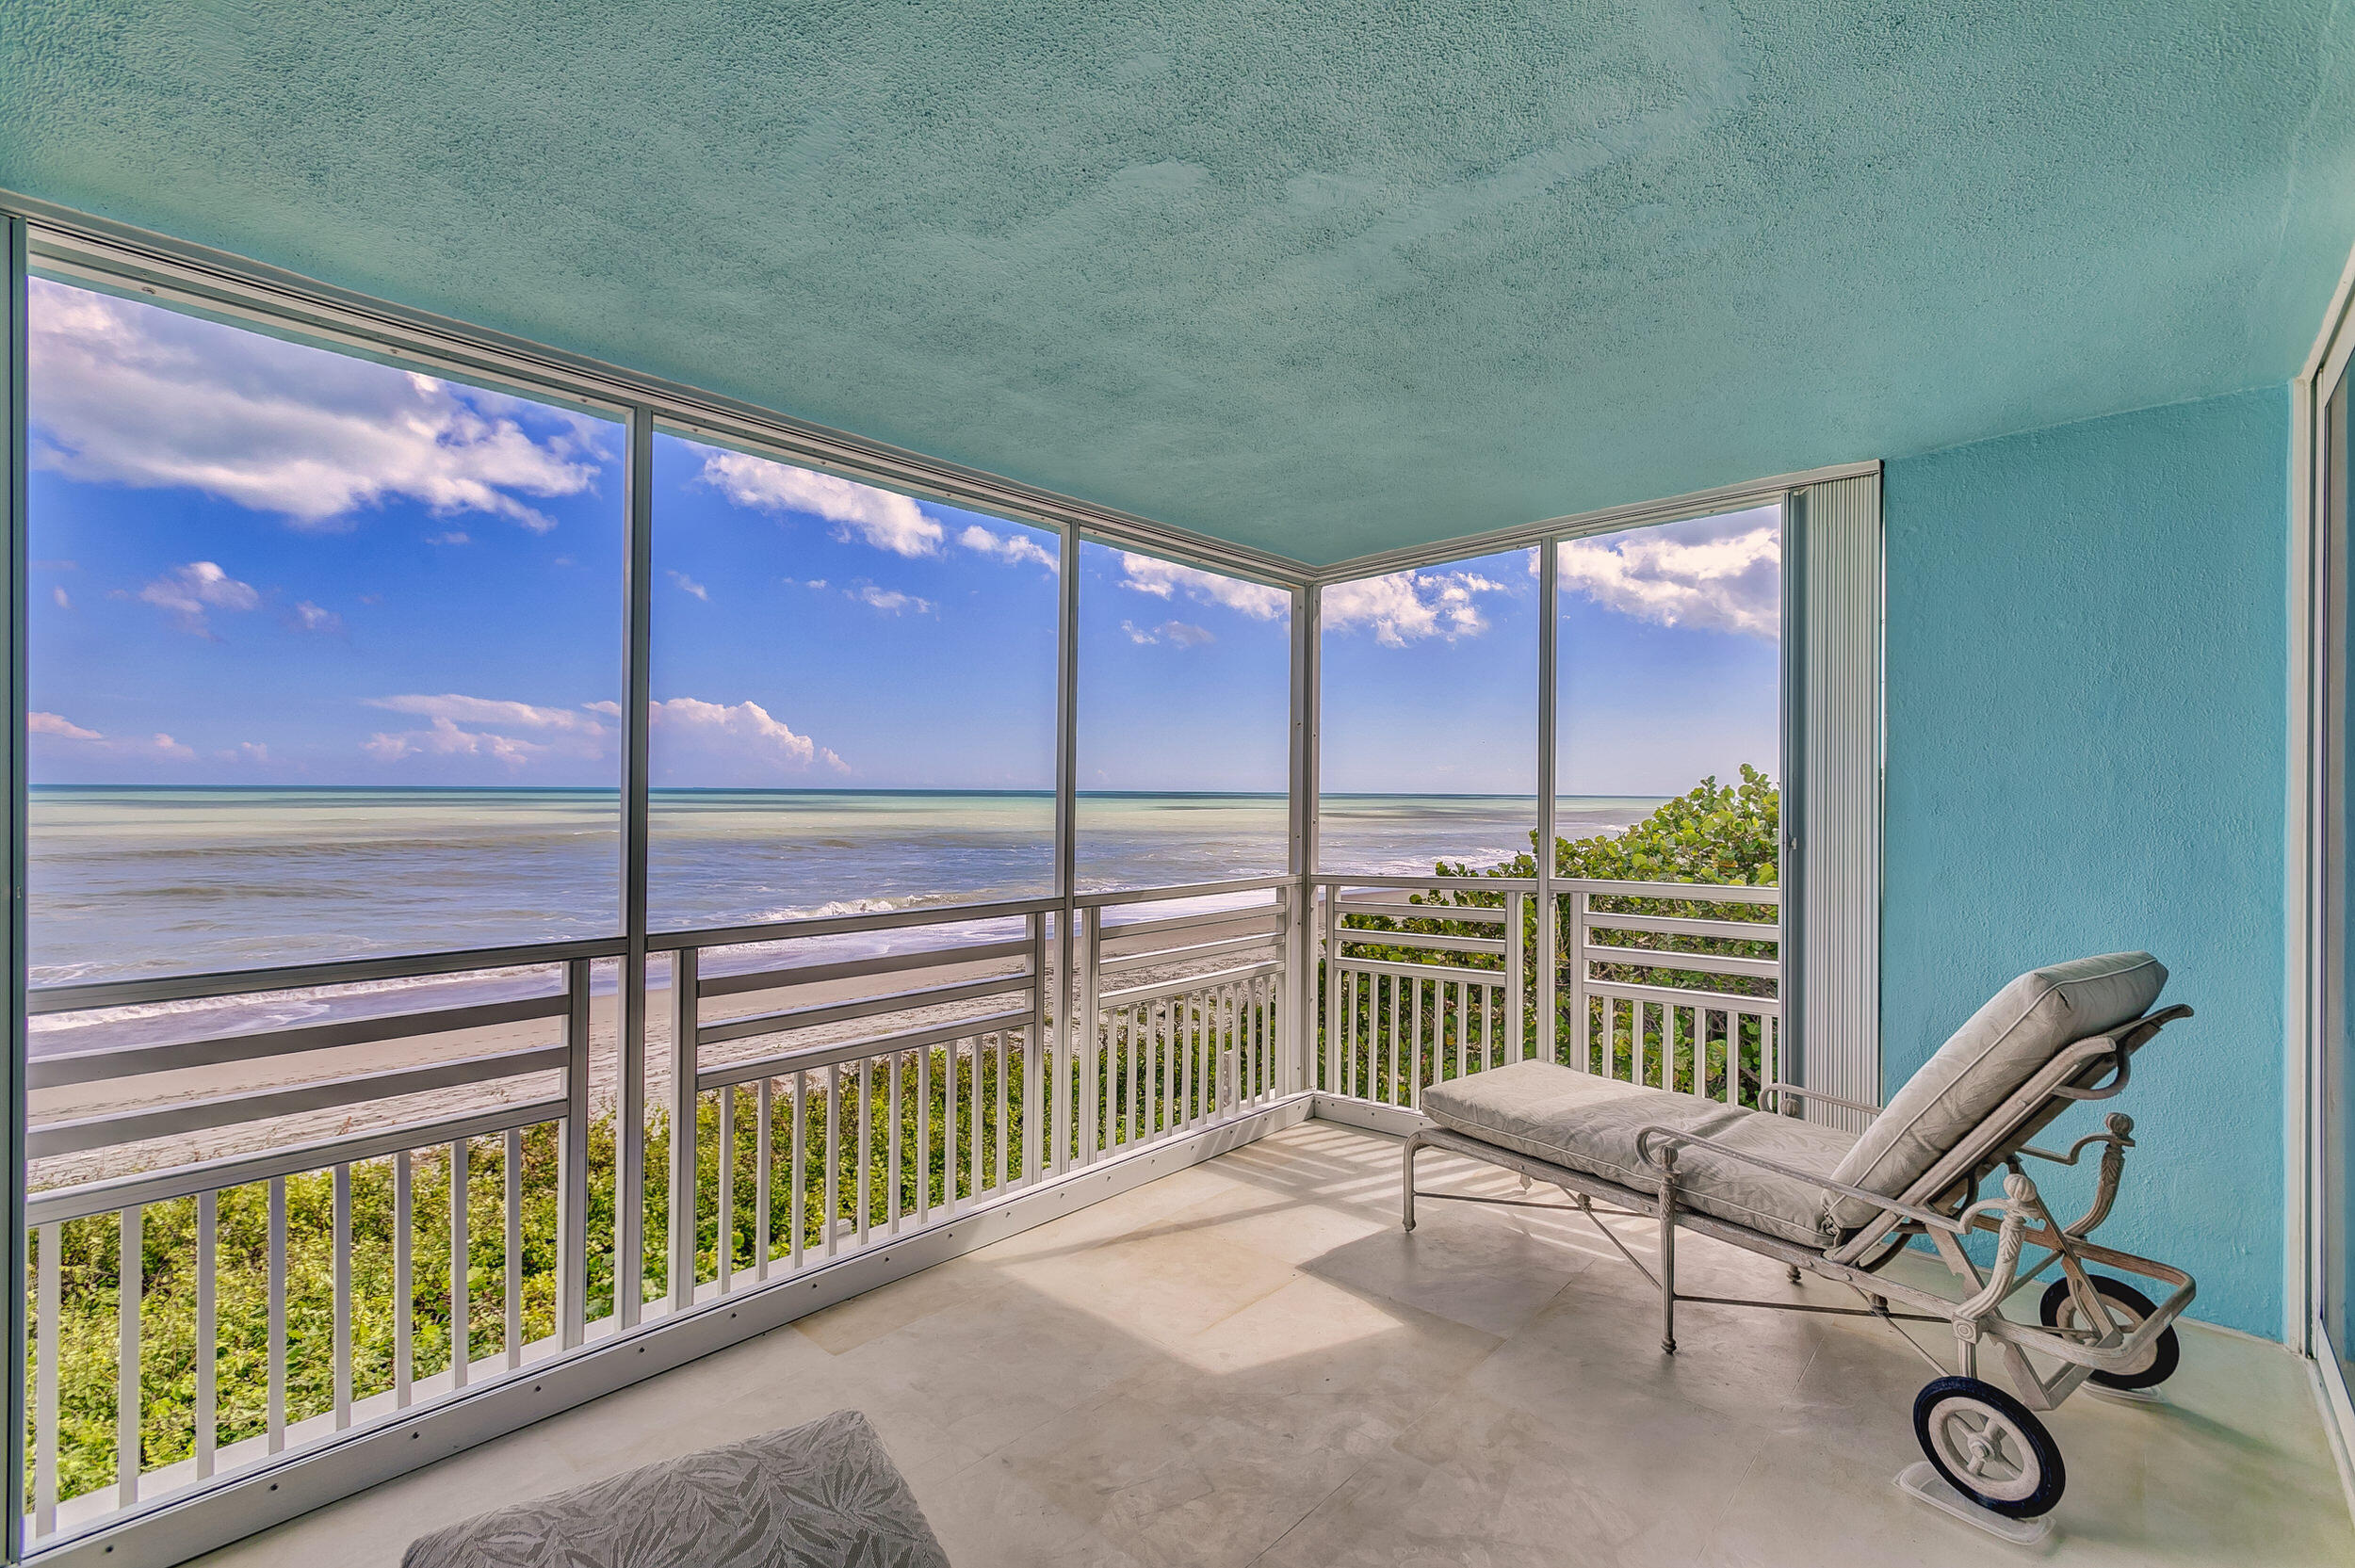 Paradise calling!  Spectacular ocean views from nearly every room of this direct oceanfront corner unit with coveted southeast exposure in the heart of Juno Beach.  This rarely available 3 bedroom, 2 bath unit has been totally renovated.  Just move in and enjoy.  Impact Glass, marble flooring, tankless hot water heater, large open kitchen with island, fine wood cabinetry and high end appliances. The unit is used as a 2 bedroom with the third bedroom utilized as a hobby room.  Wake in the morning to breathtaking sunrises.  Take a walk on the beach to start your day.  Ride a bike along Ocean Drive to one of the many nearby cafes. Building amenities include elevator, 24-hour gated parking with video surveillance, oceanfront pool, assigned storage, plus common area storage and clubhouse